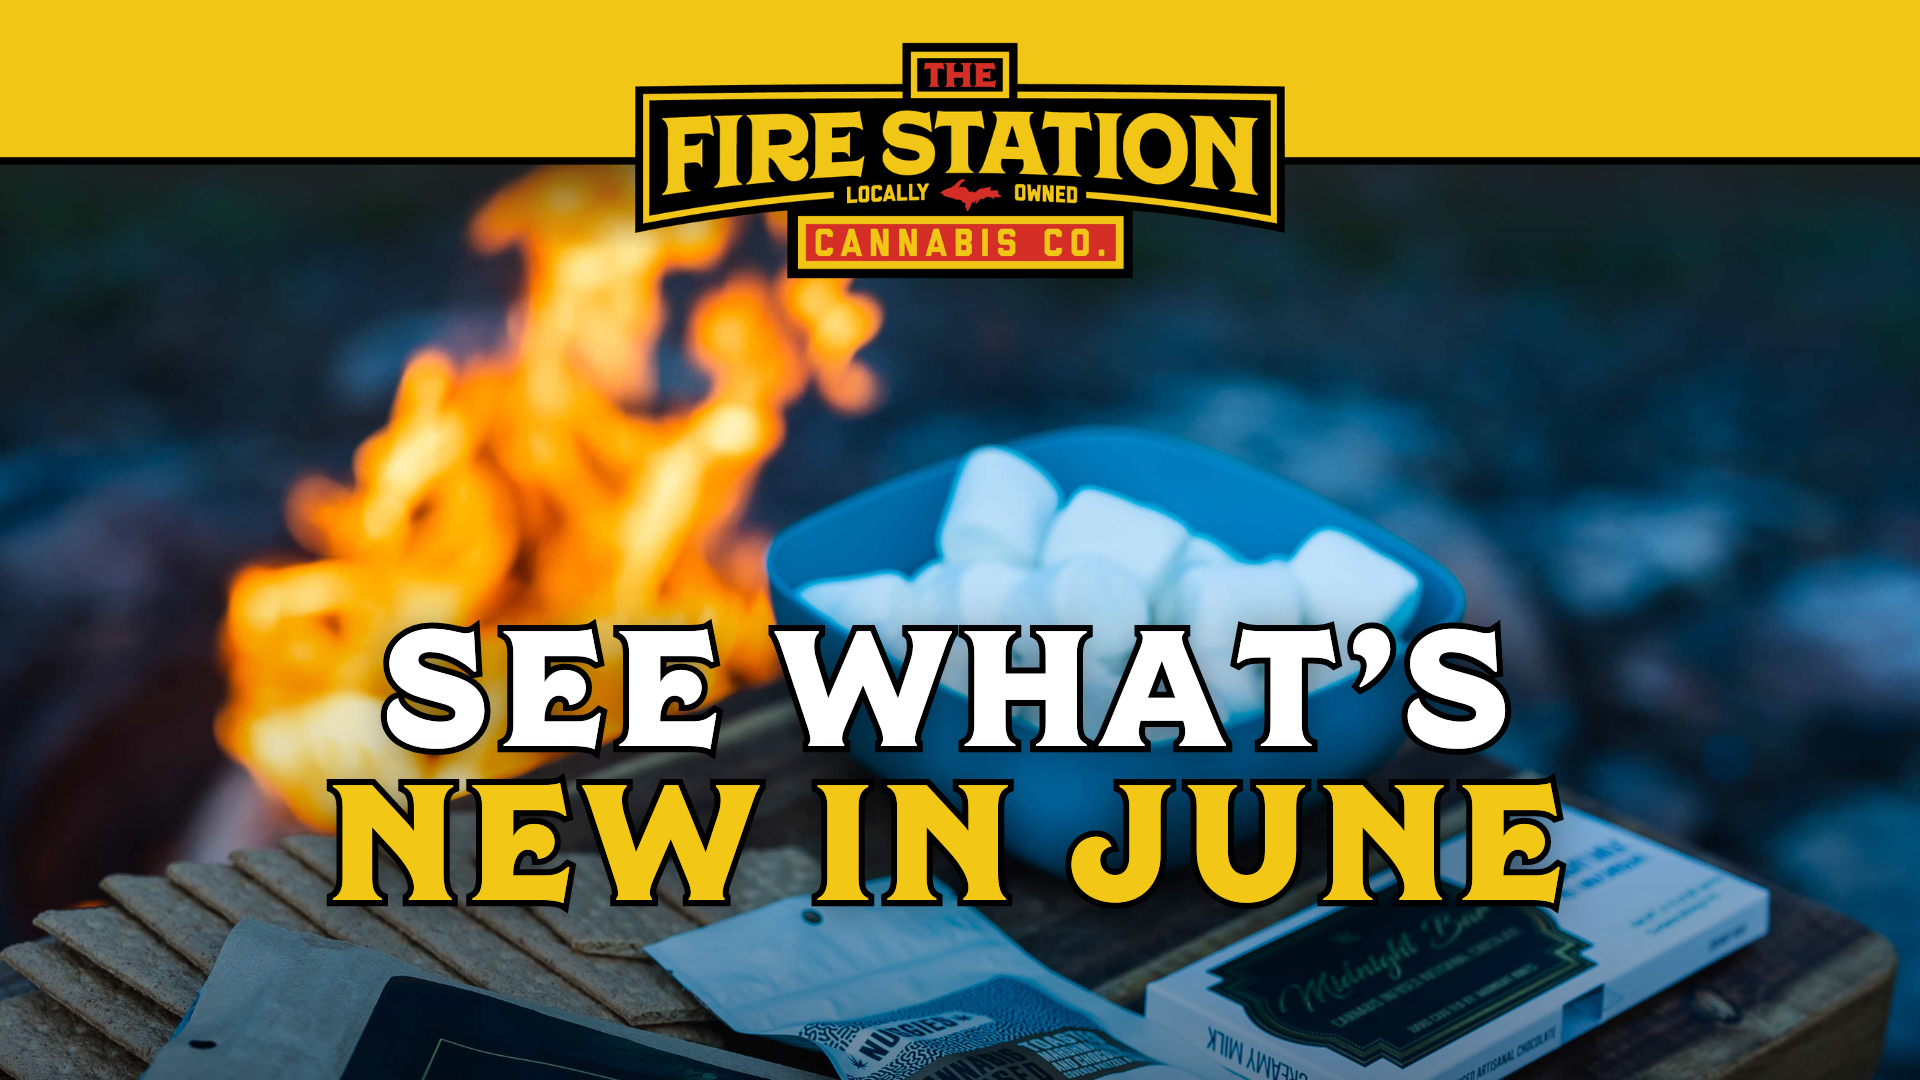 See what's new in June at The Fire Station Cannabis Company